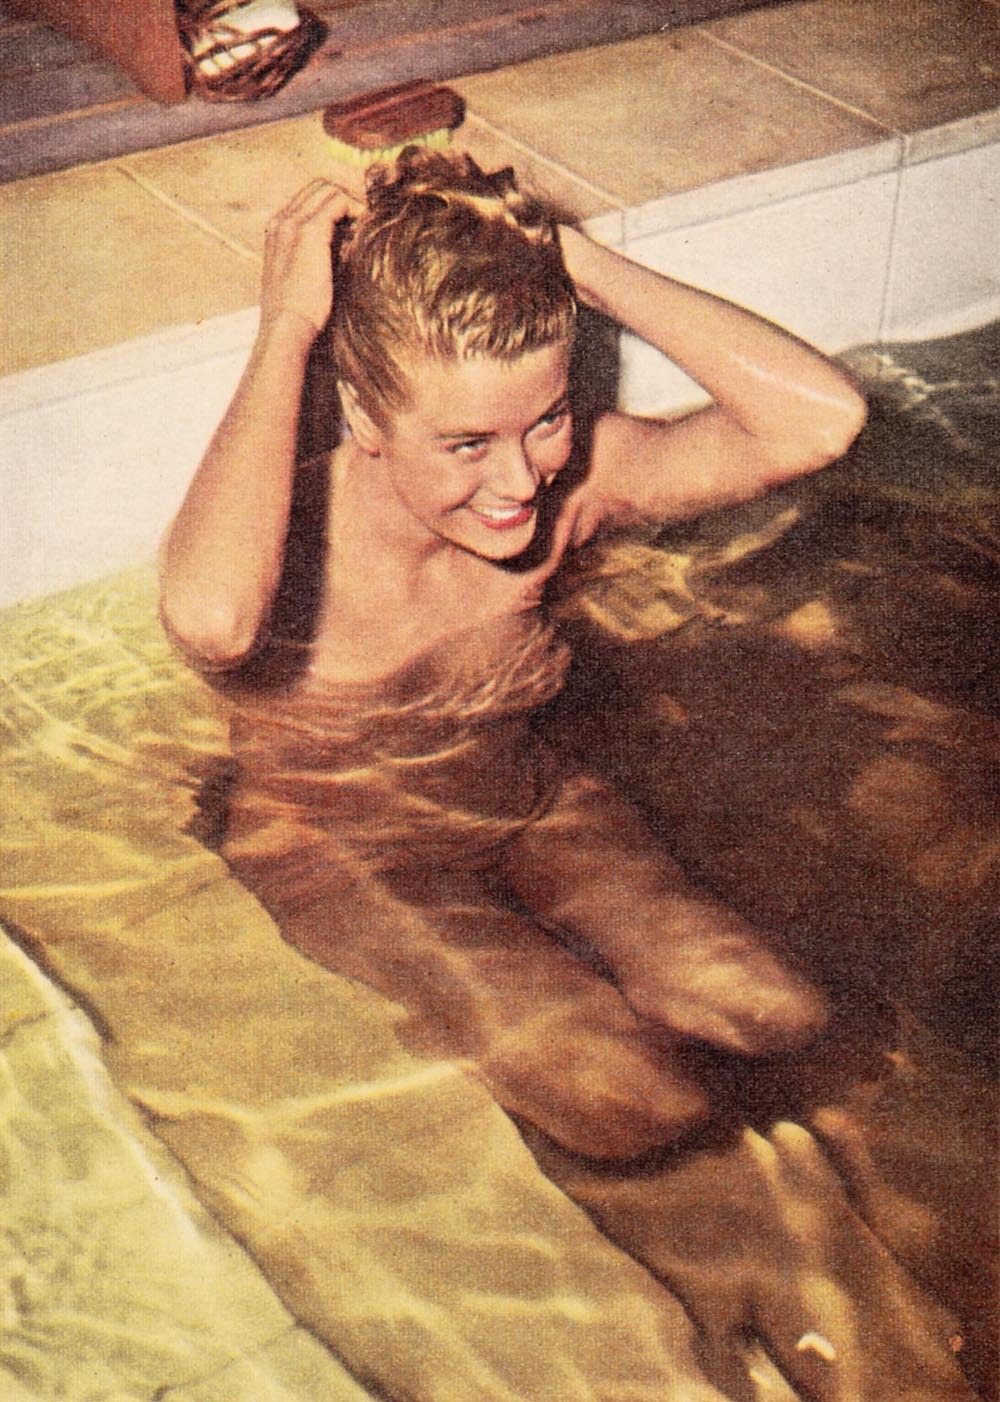 Grace Kelly skinny dipping in Jamaica, 1955